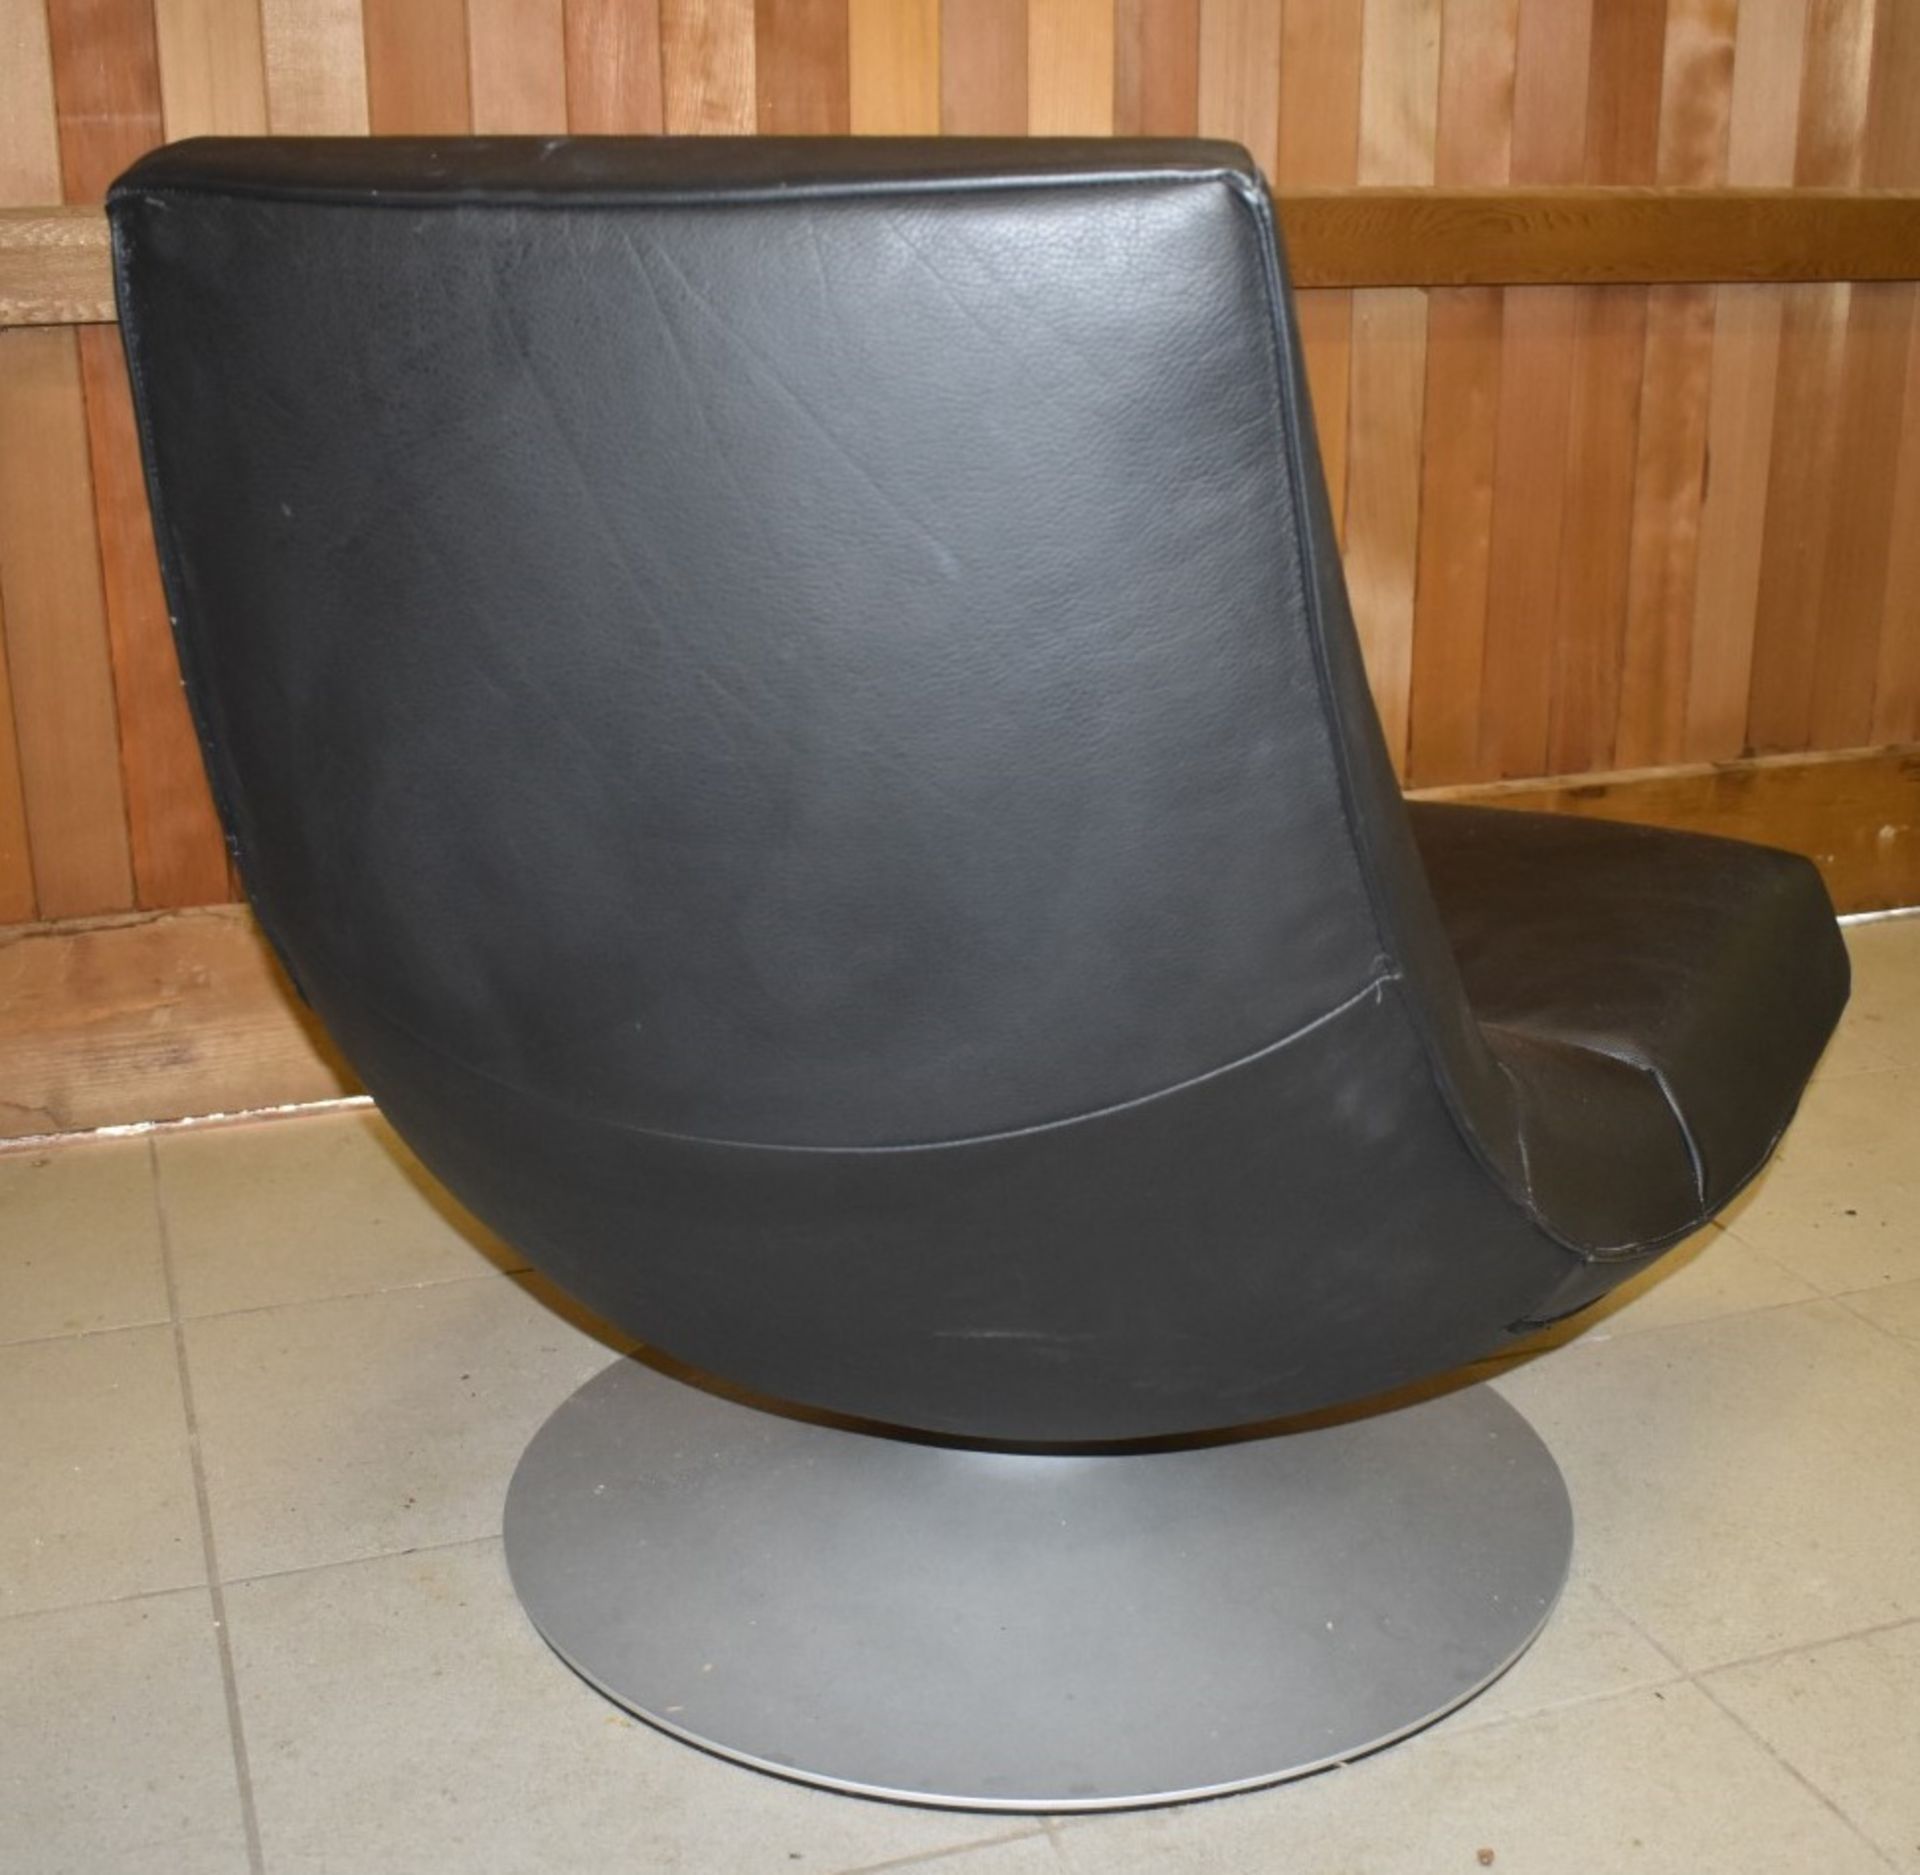 1 x Contemporary Black Leather Swivel Chair With Silver Base - Dimensions: H85/40 x W97 x D100 cms - - Image 3 of 3